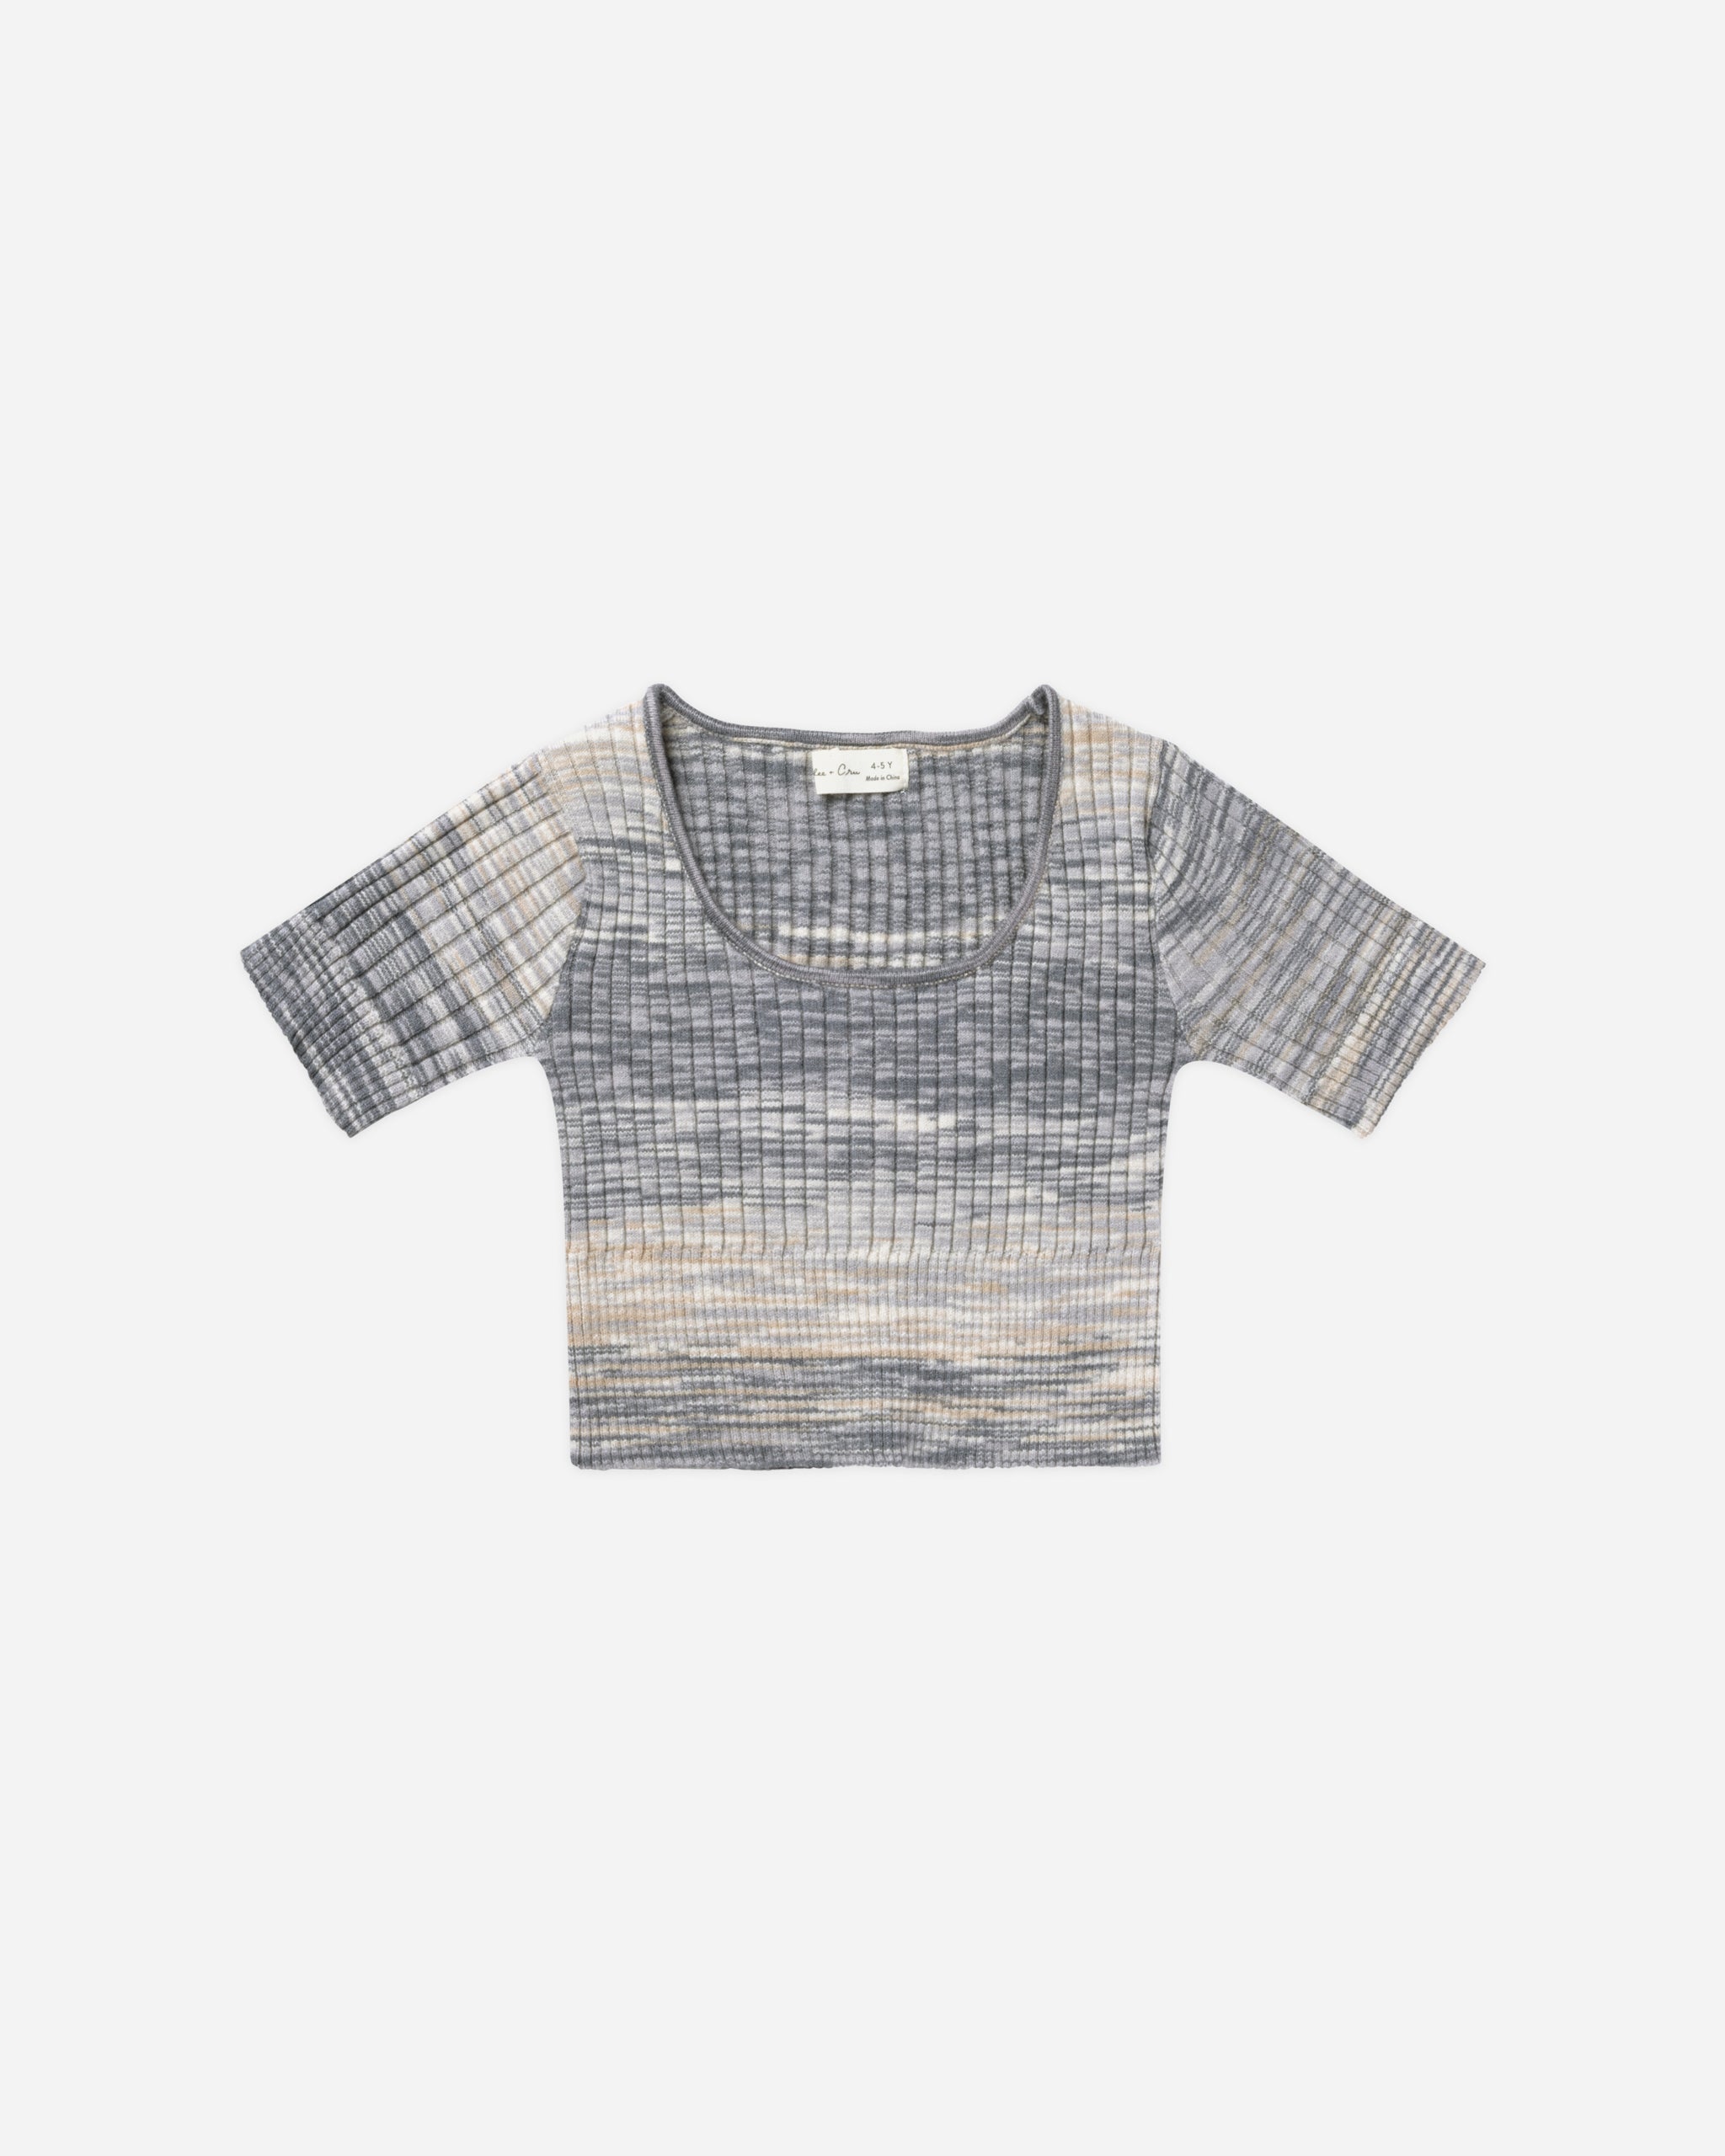 Square Neck Rib Tee || Heathered Blue - Rylee + Cru | Kids Clothes | Trendy Baby Clothes | Modern Infant Outfits |